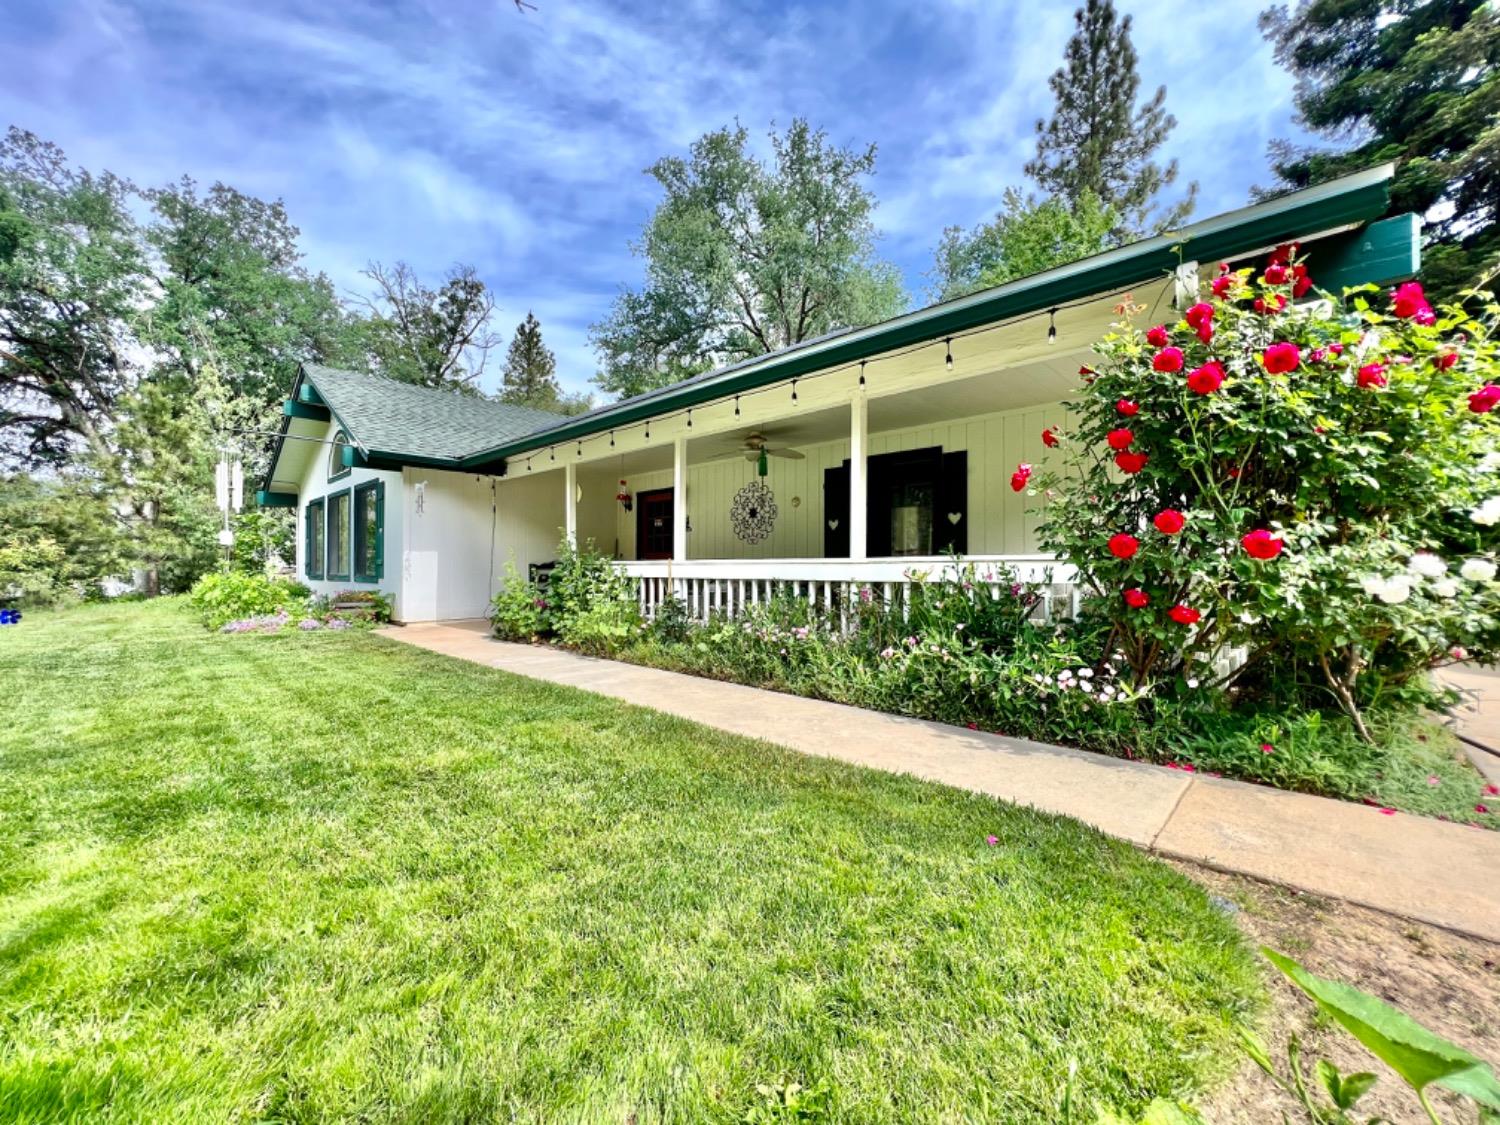 This beautiful property in Coarsegold, California is situated on just over 2 acres of land. The three-bedroom, two-bathroom house features a woodburning fire stove, making it cozy and perfect for a family or as an Airbnb rental. One of the standout features of this property is that there are no HOA fees to worry about.The property also boasts solar panels that are owned, providing energy efficiency and cost savings. Additionally, there are two backup batteries, ensuring that the home remains fully operational even during power outages. For horse enthusiasts, this property offers five covered horse stalls, three paddocks, and a 60-foot round pen. These amenities make it an ideal location for horse owners or those interested in equestrian activities. There is also an existing outbuilding on the property that has electrical connections and water supply nearby. With some plumbing work, this outbuilding can be transformed into a separate Accessory Dwelling Unit (ADU), providing additional living space or rental income potential.The property features a circle driveway, making it easy to access and providing ample parking space. Its location is also advantageous, as it is only 26 miles away from the gate of Yosemite National Park. This proximity makes it perfect for families who enjoy horseback riding or hiking on the park's trails. If you enjoy the lake life, Bass Lake is only 13 miles away, so don't forget your boat!